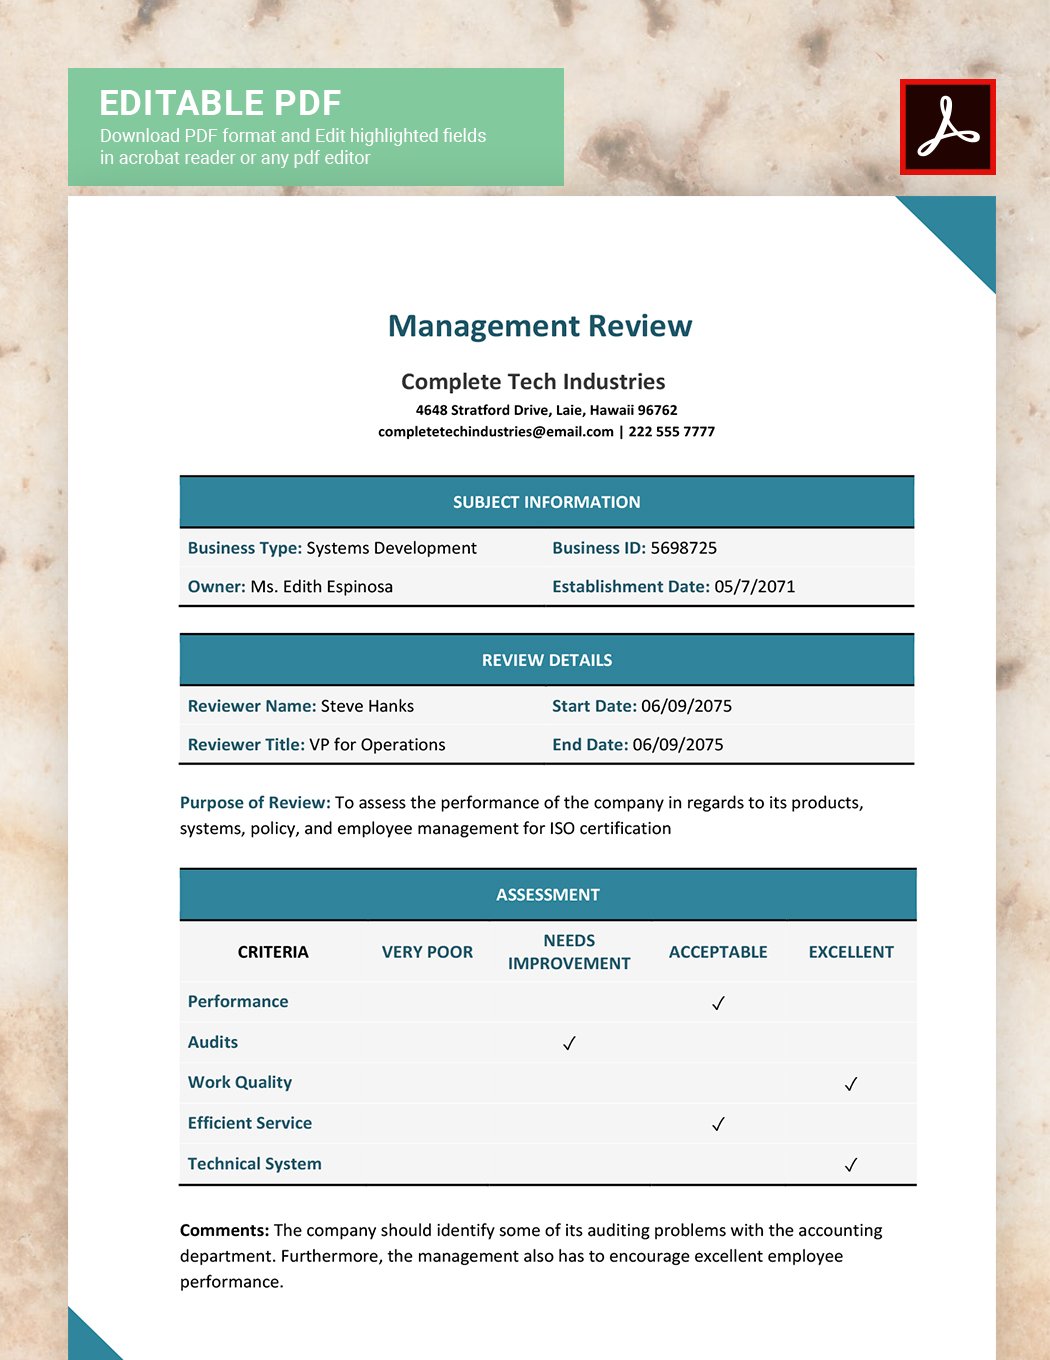 Management Review Template Download in Word, Google Docs